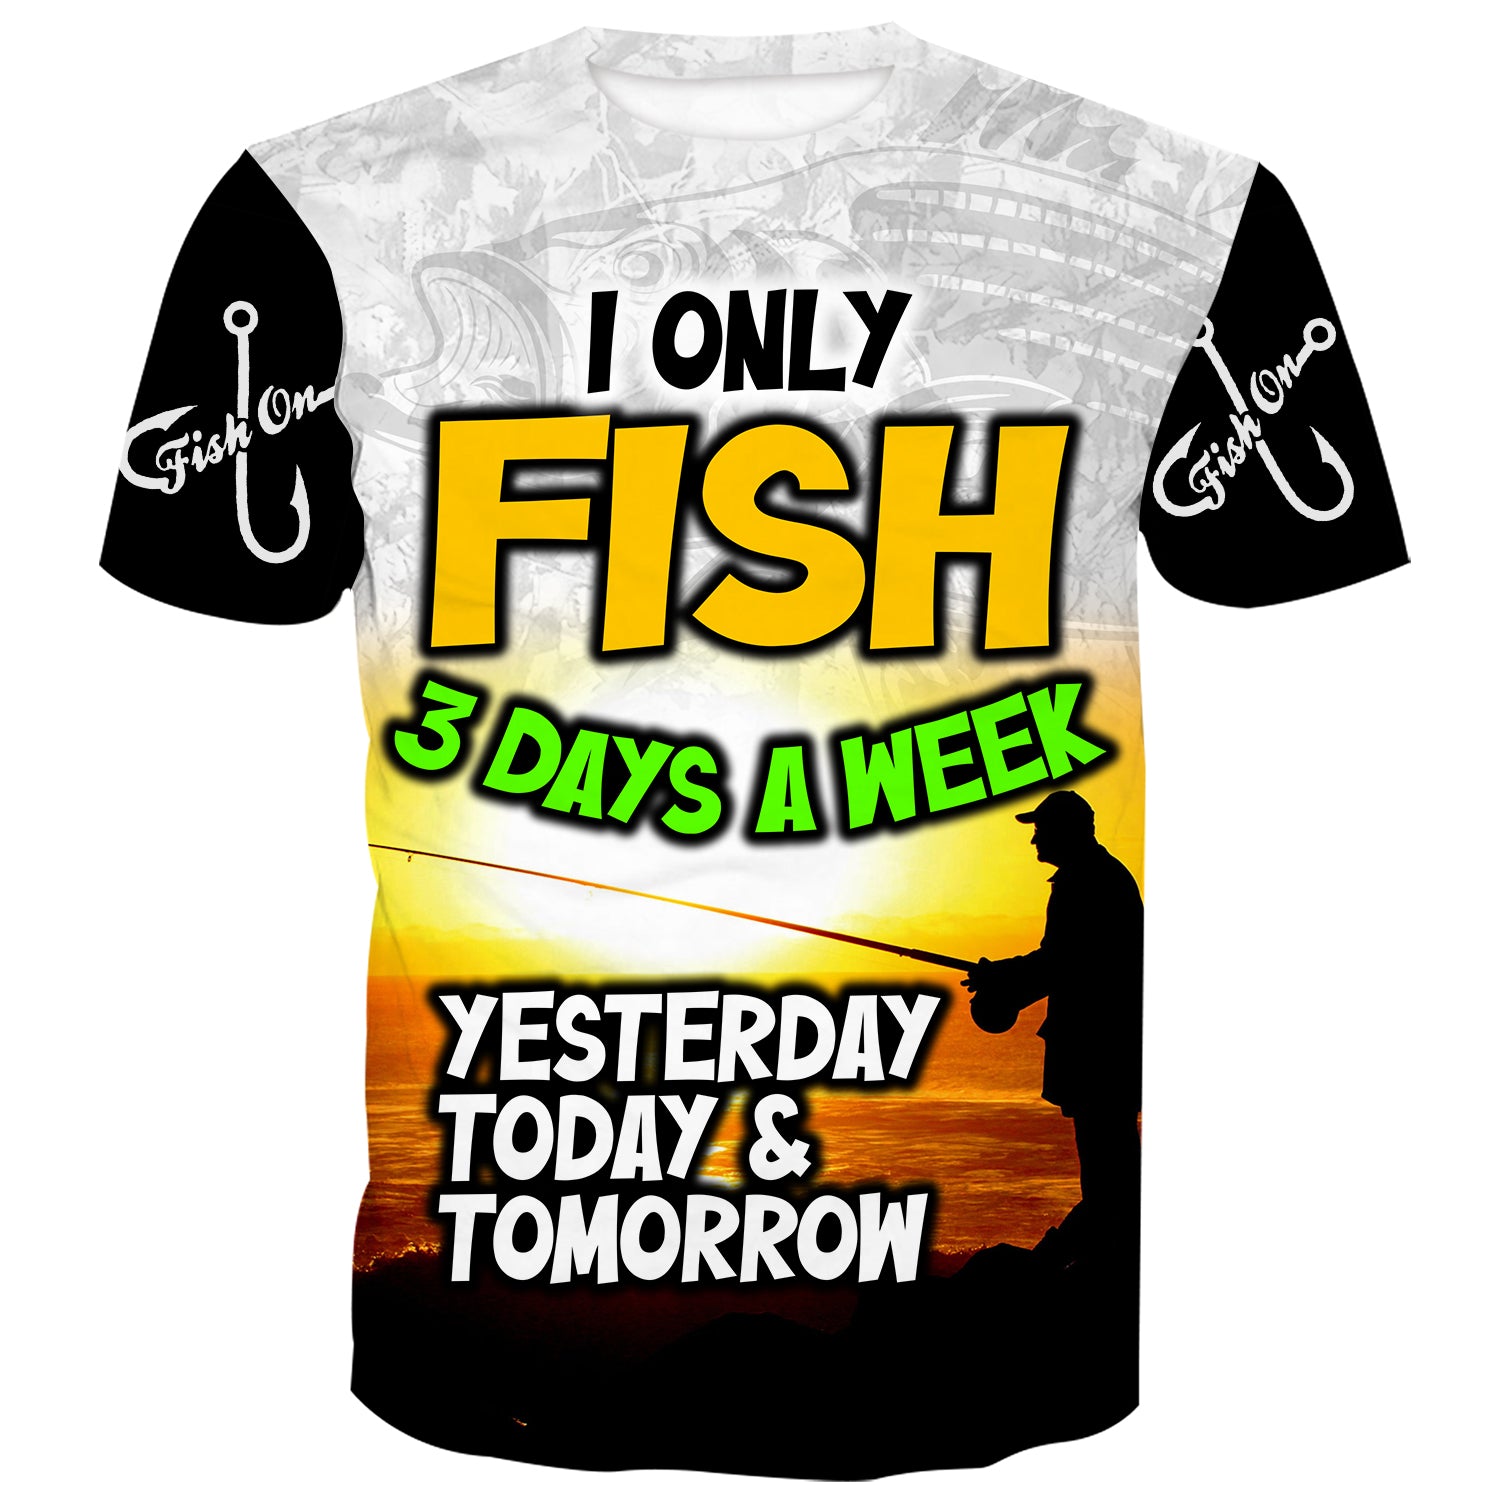 I fish only 3 Days a week yesterday, today, tomorrow - Fishing T-Shirt